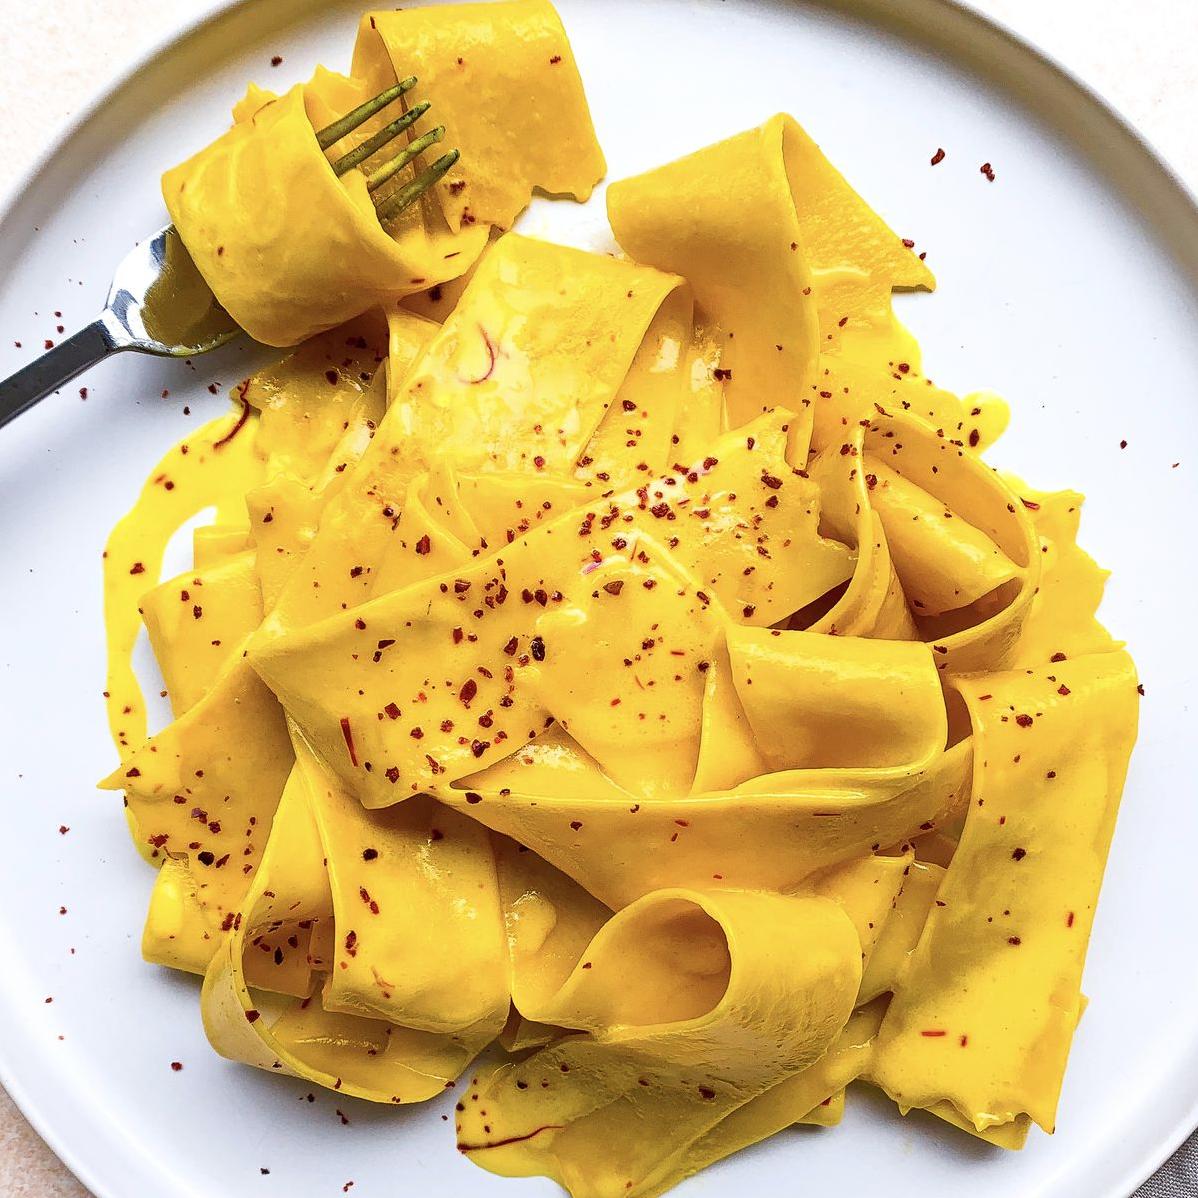  Treat yourself to something special with this saffron-infused pasta dough.